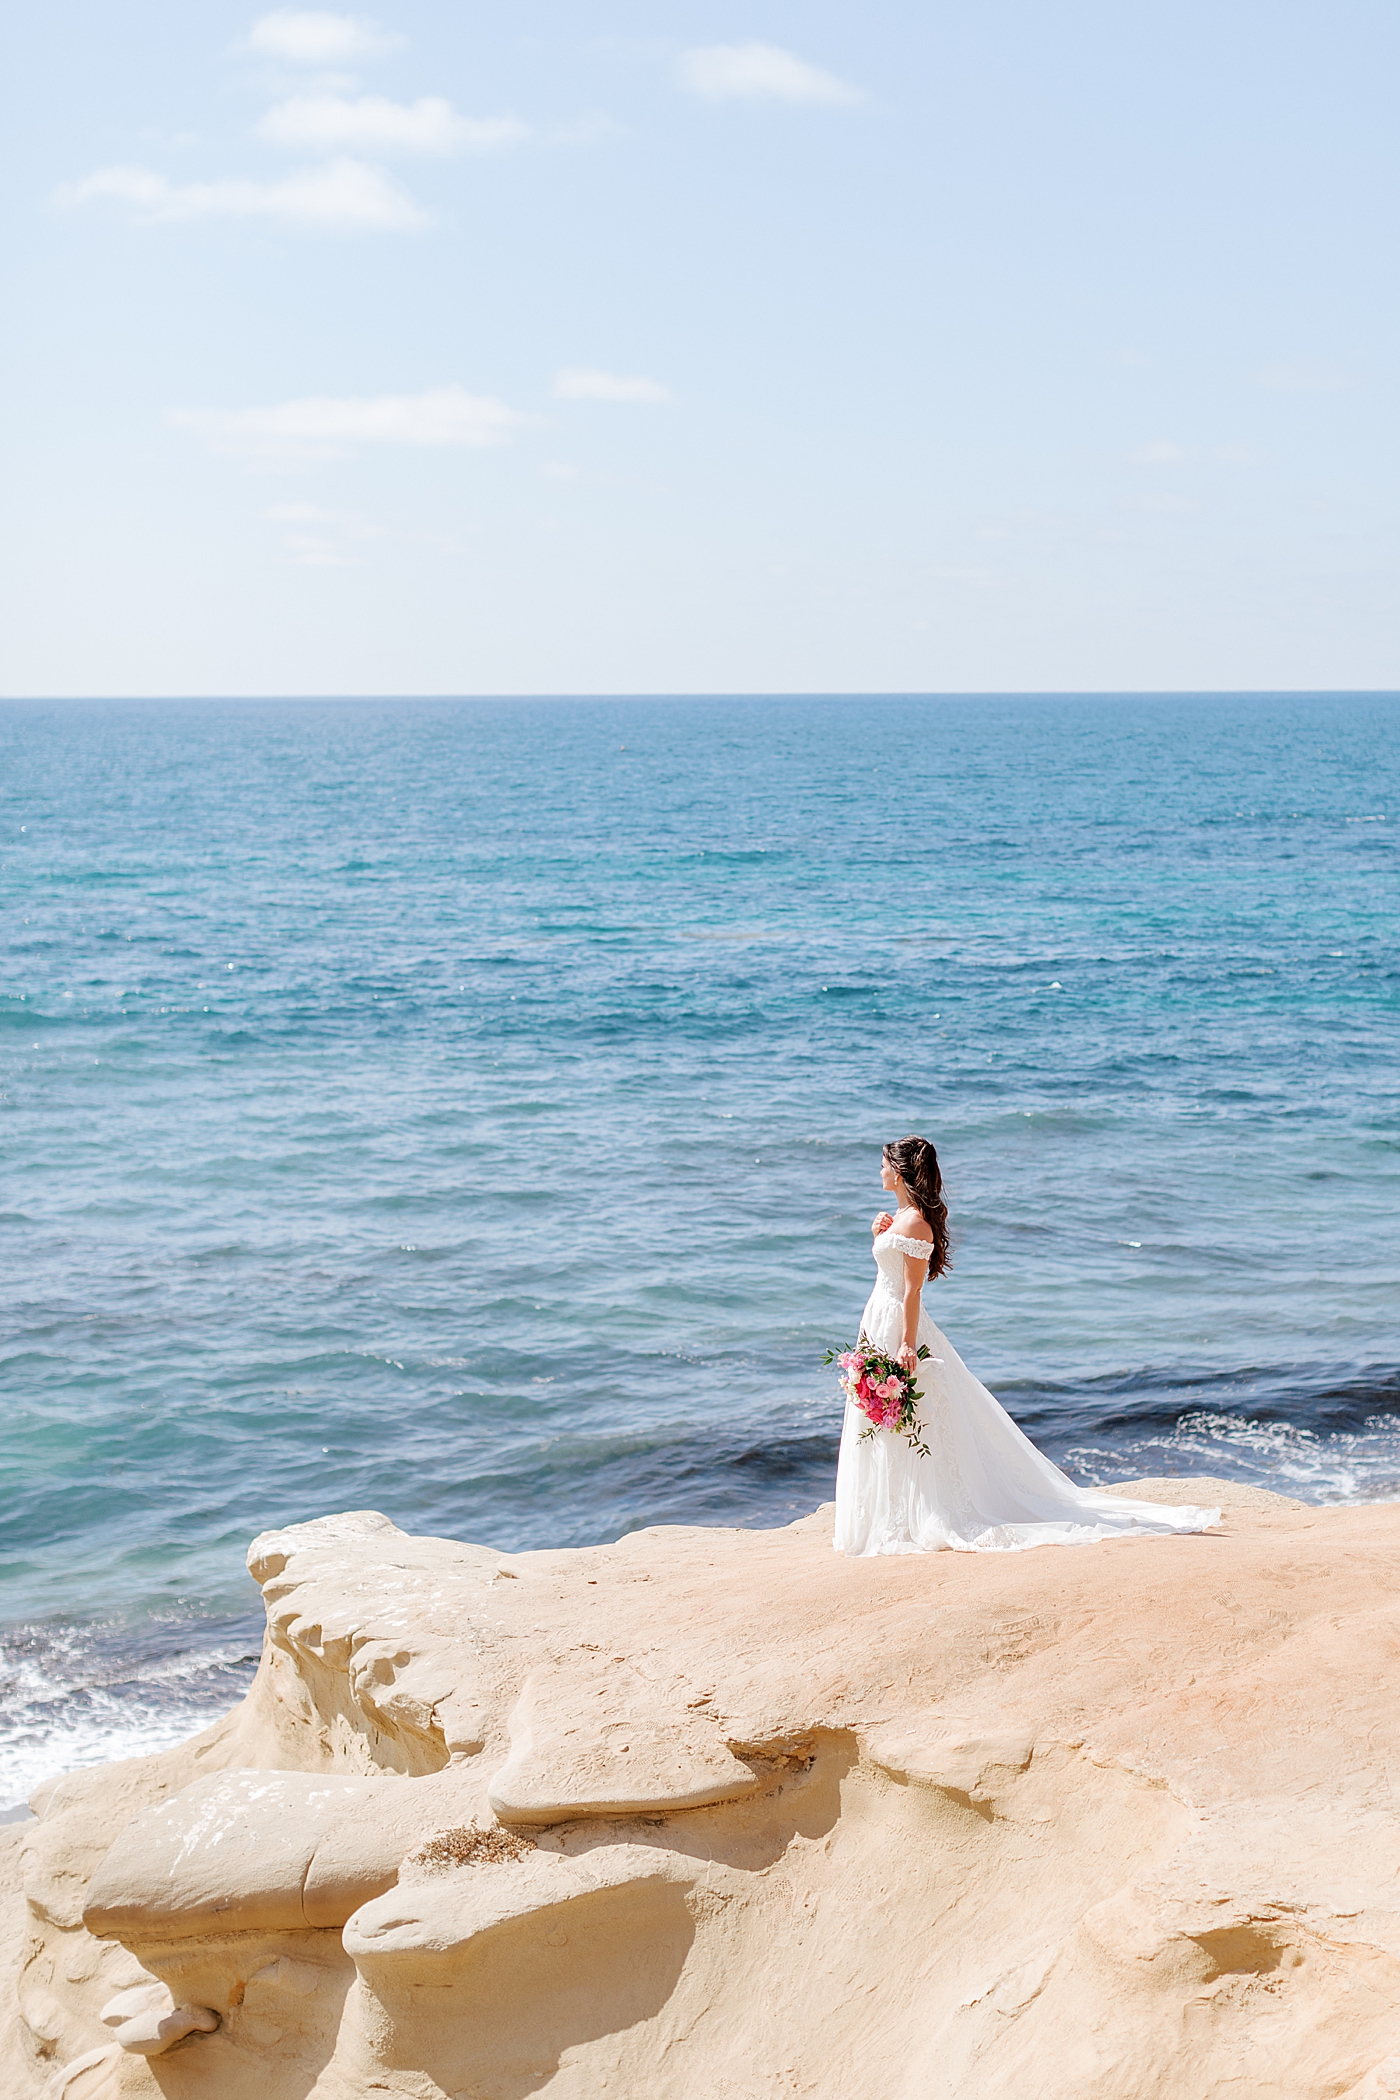 Bride alone at a distance looking away and out at the water | Image by Hope Helmuth Photography